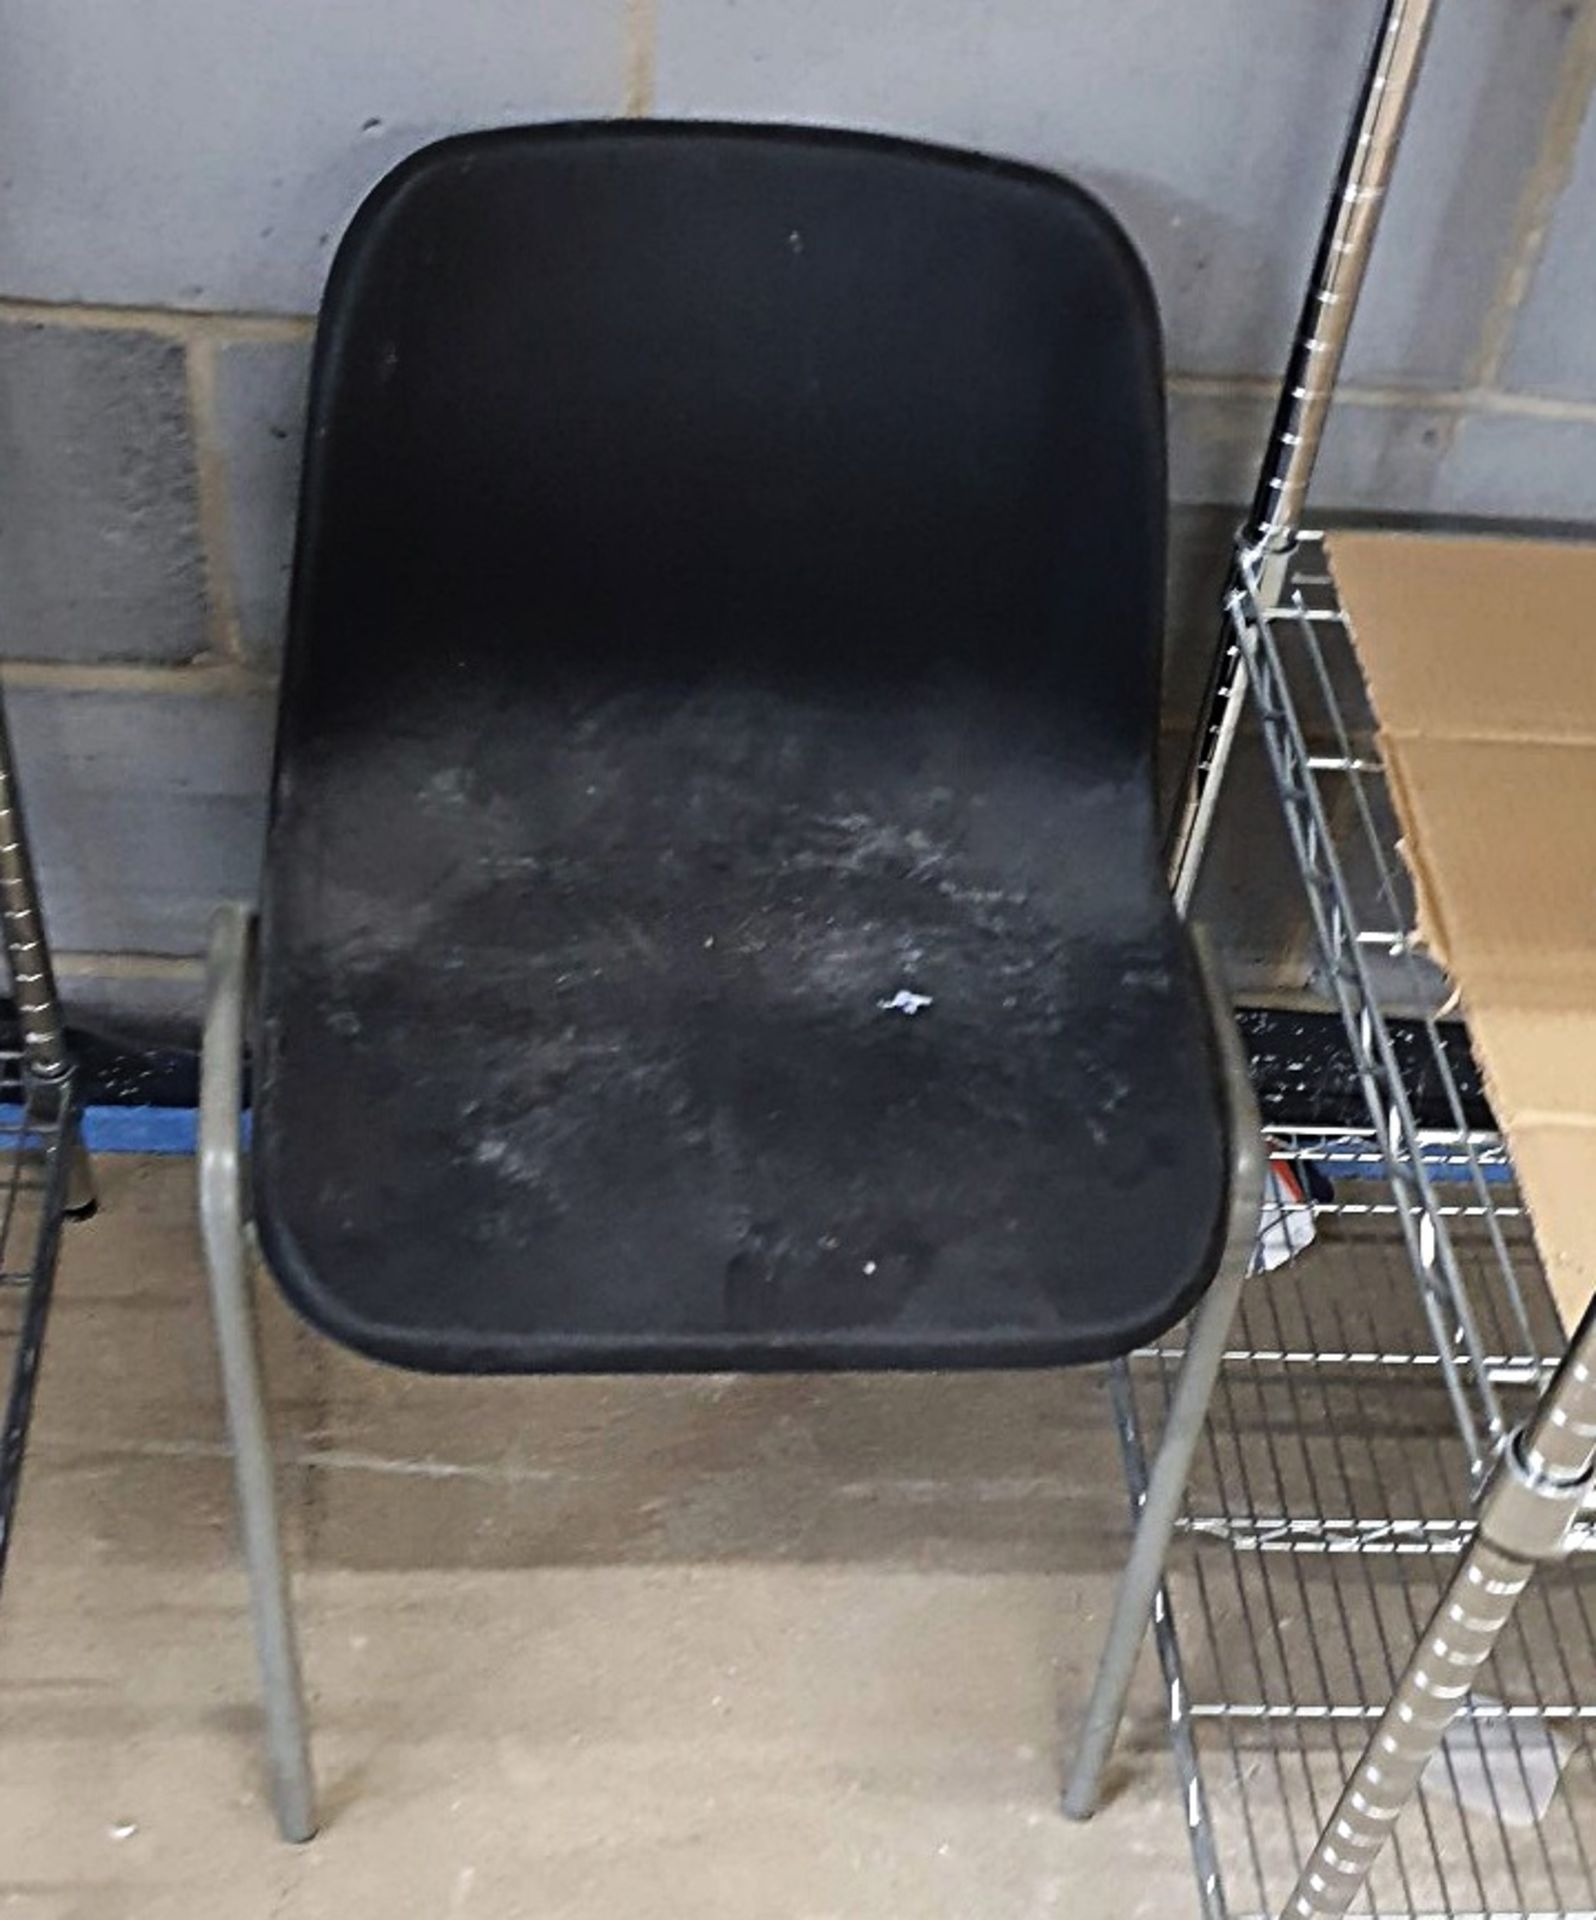 4 x Black Stackable Chairs - Ref PA - CL463 - Location: Altrincham WA14